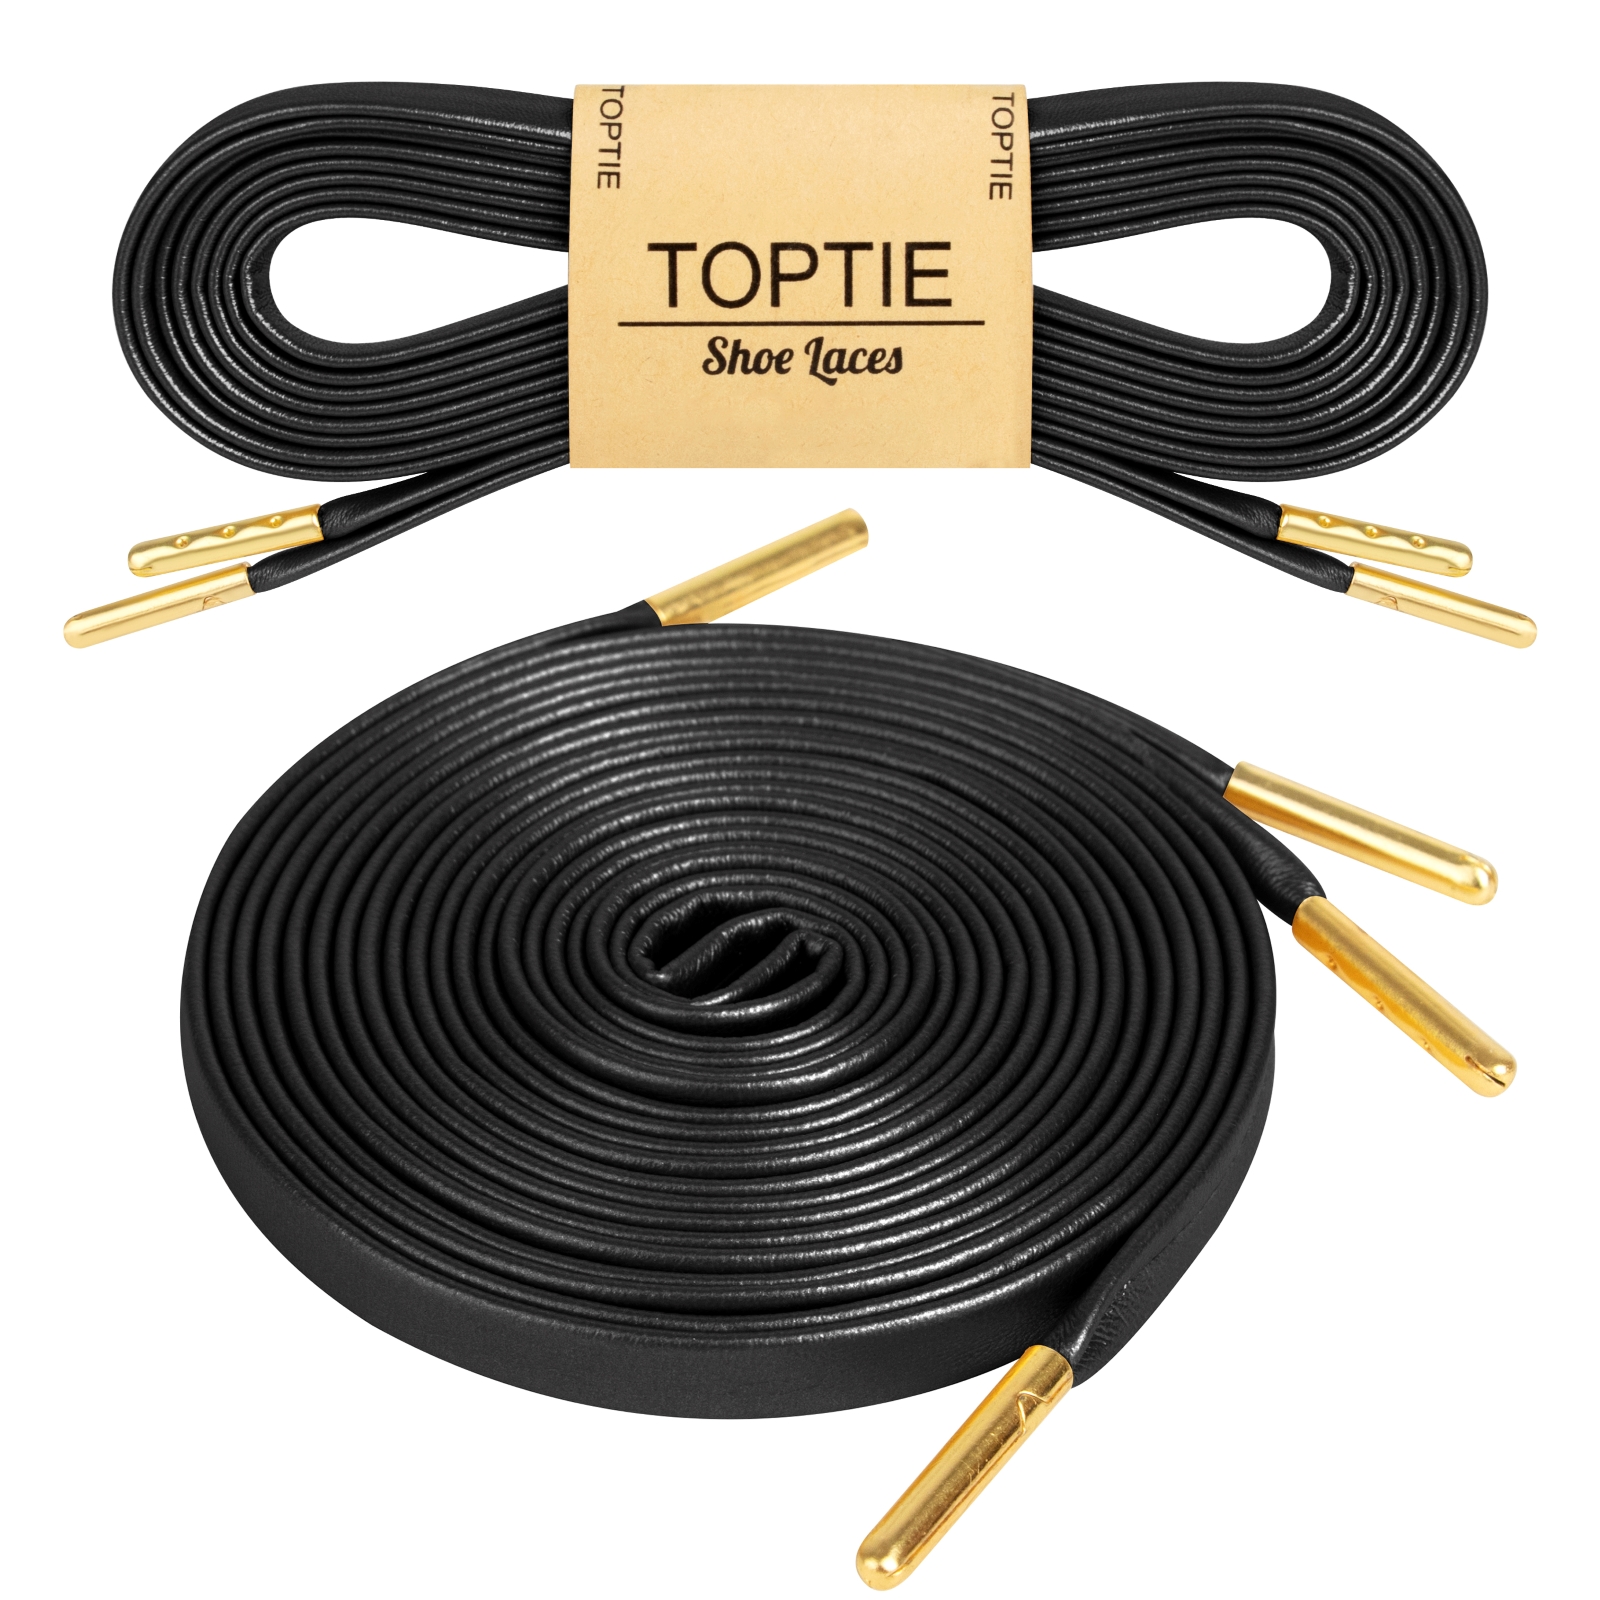 Toptie 2 Pairs Leather Shoe Laces Black Shoelaces for High Top, 72 inch Flat String with Gold Metal Tip